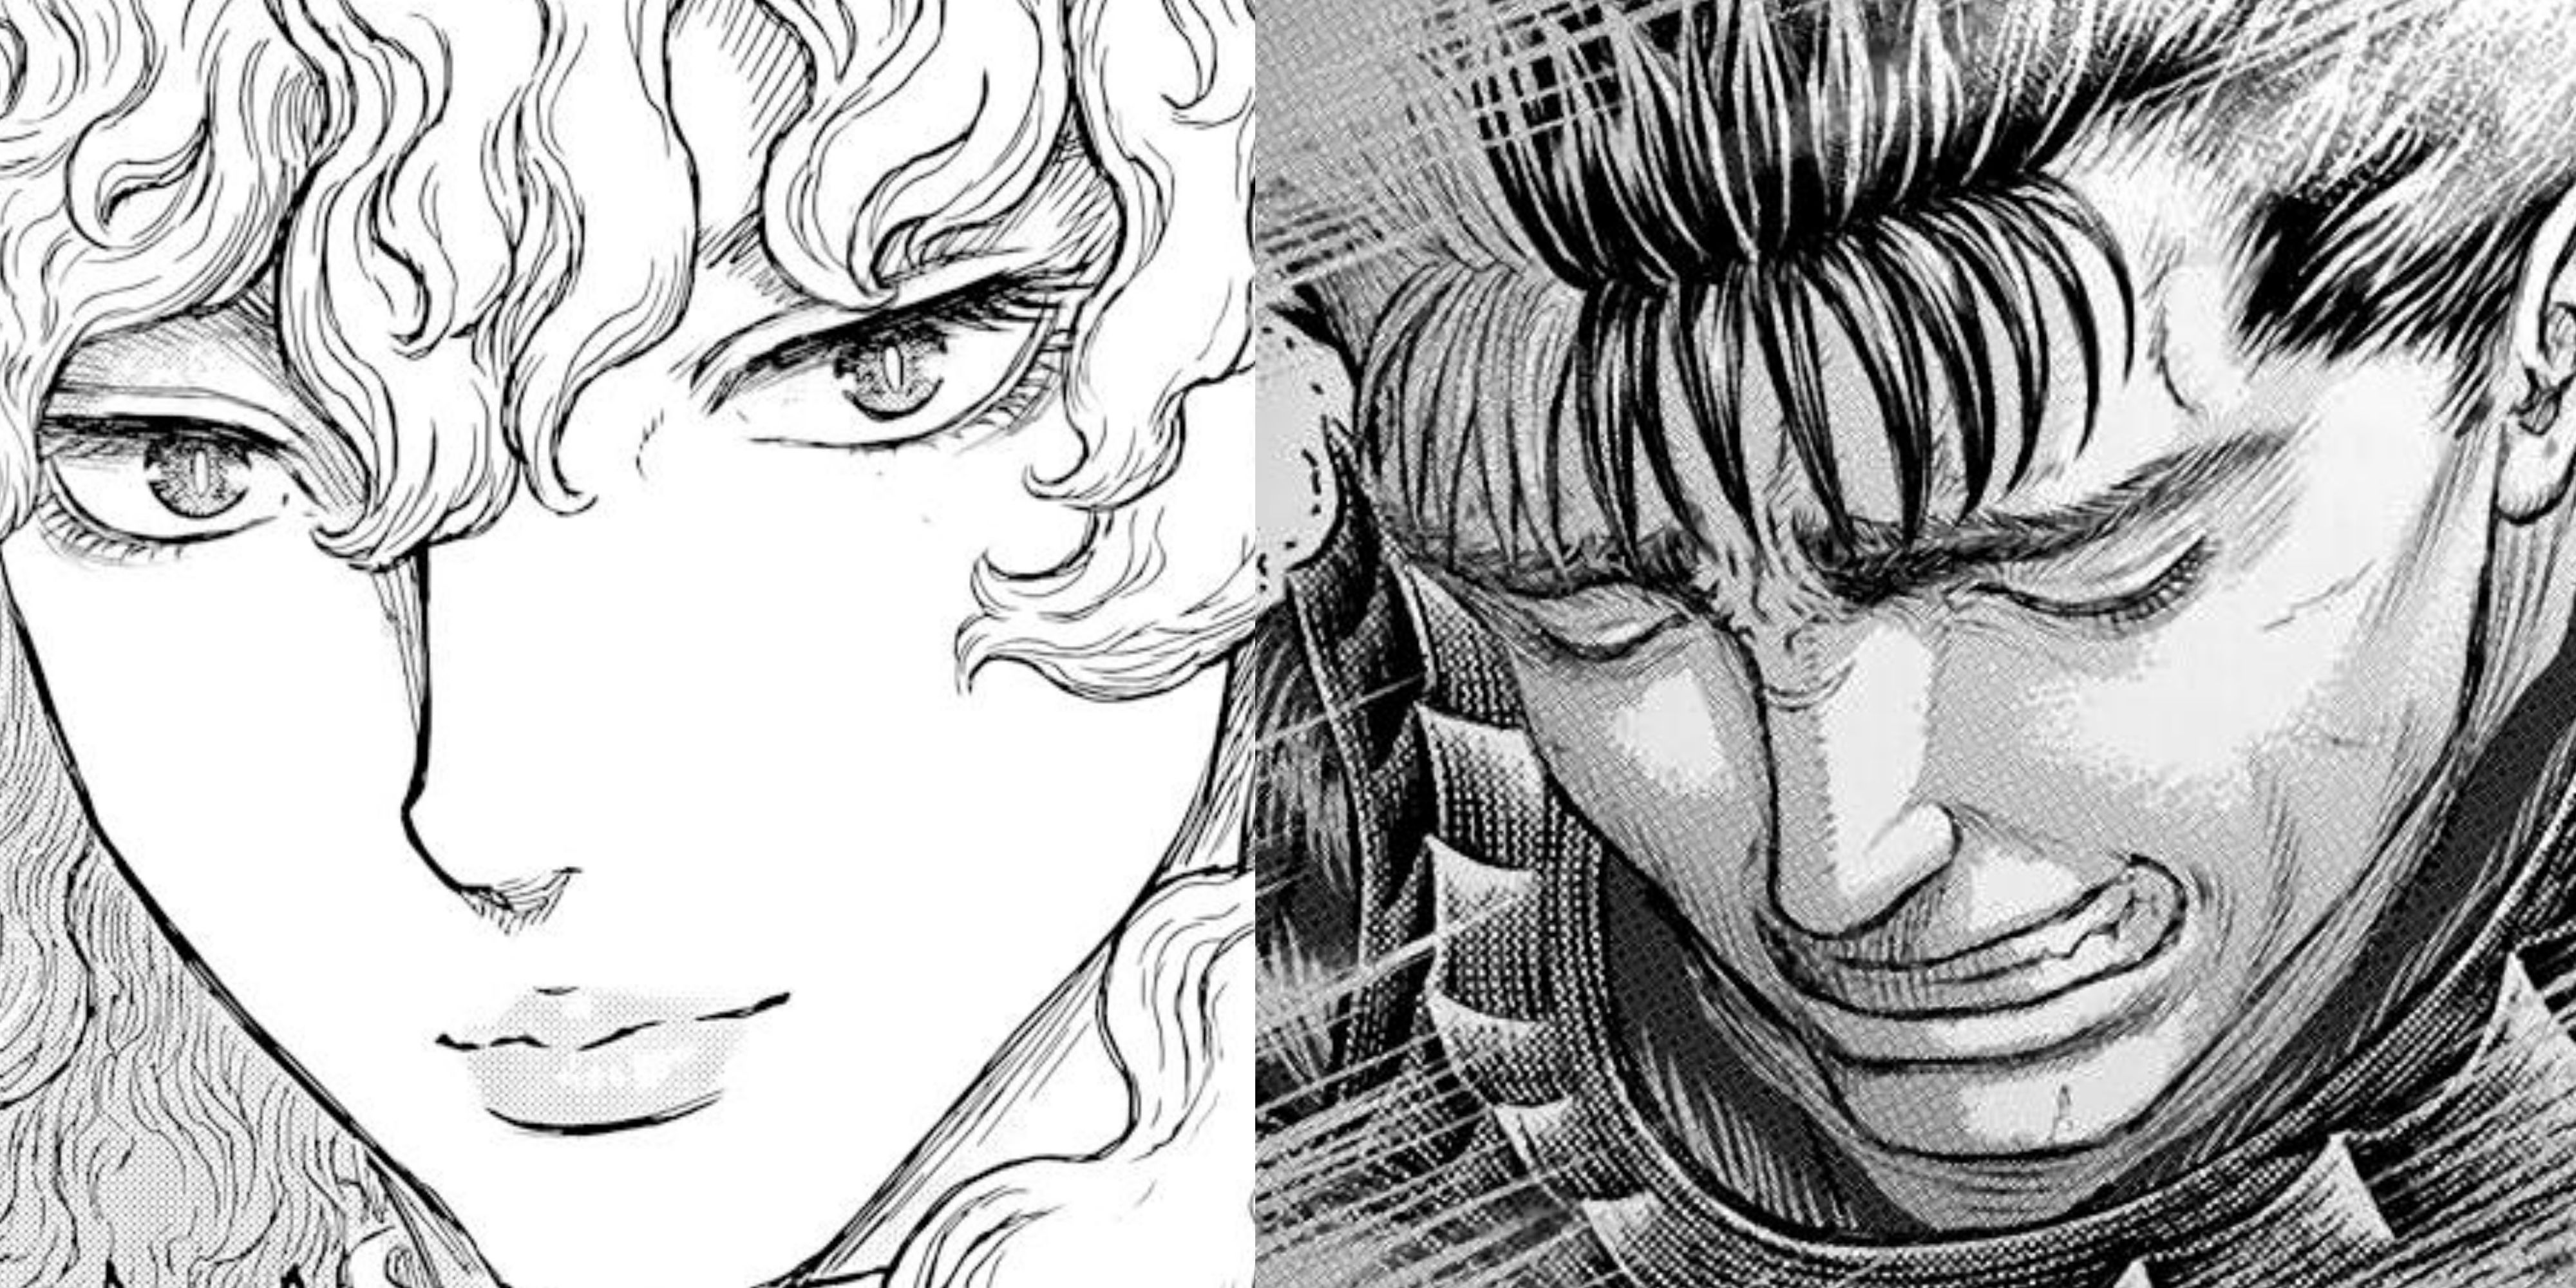 Berserk Chapter 372 Release Date & What To Expect Kaki Field Guide